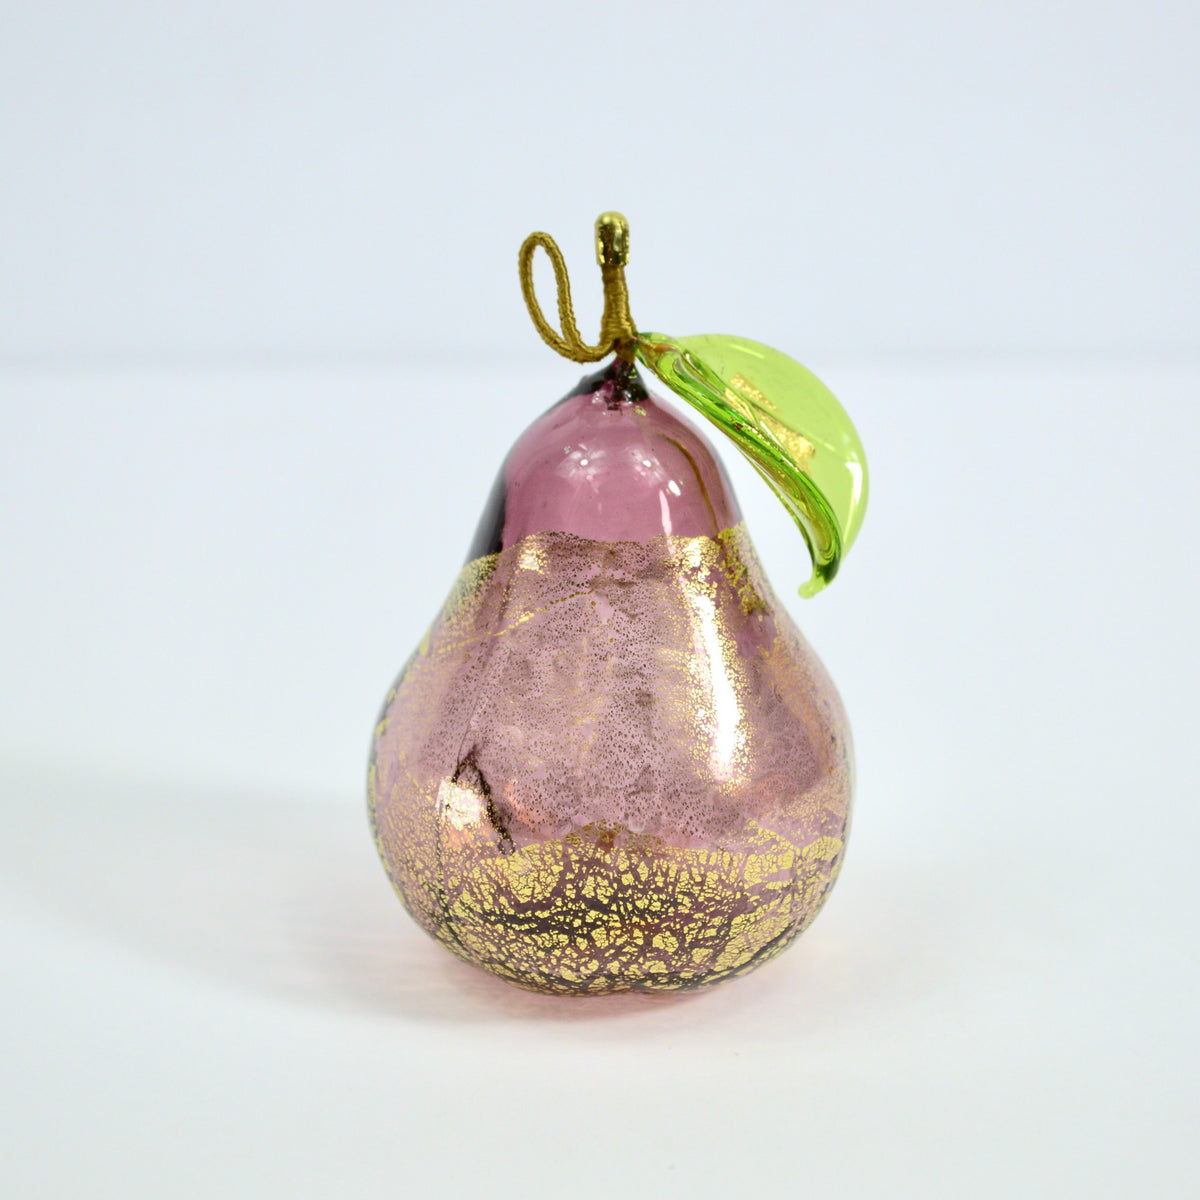 Murano Glass Blown Pear with Gold Foil, Ornament, Made In Italy, Gift Idea